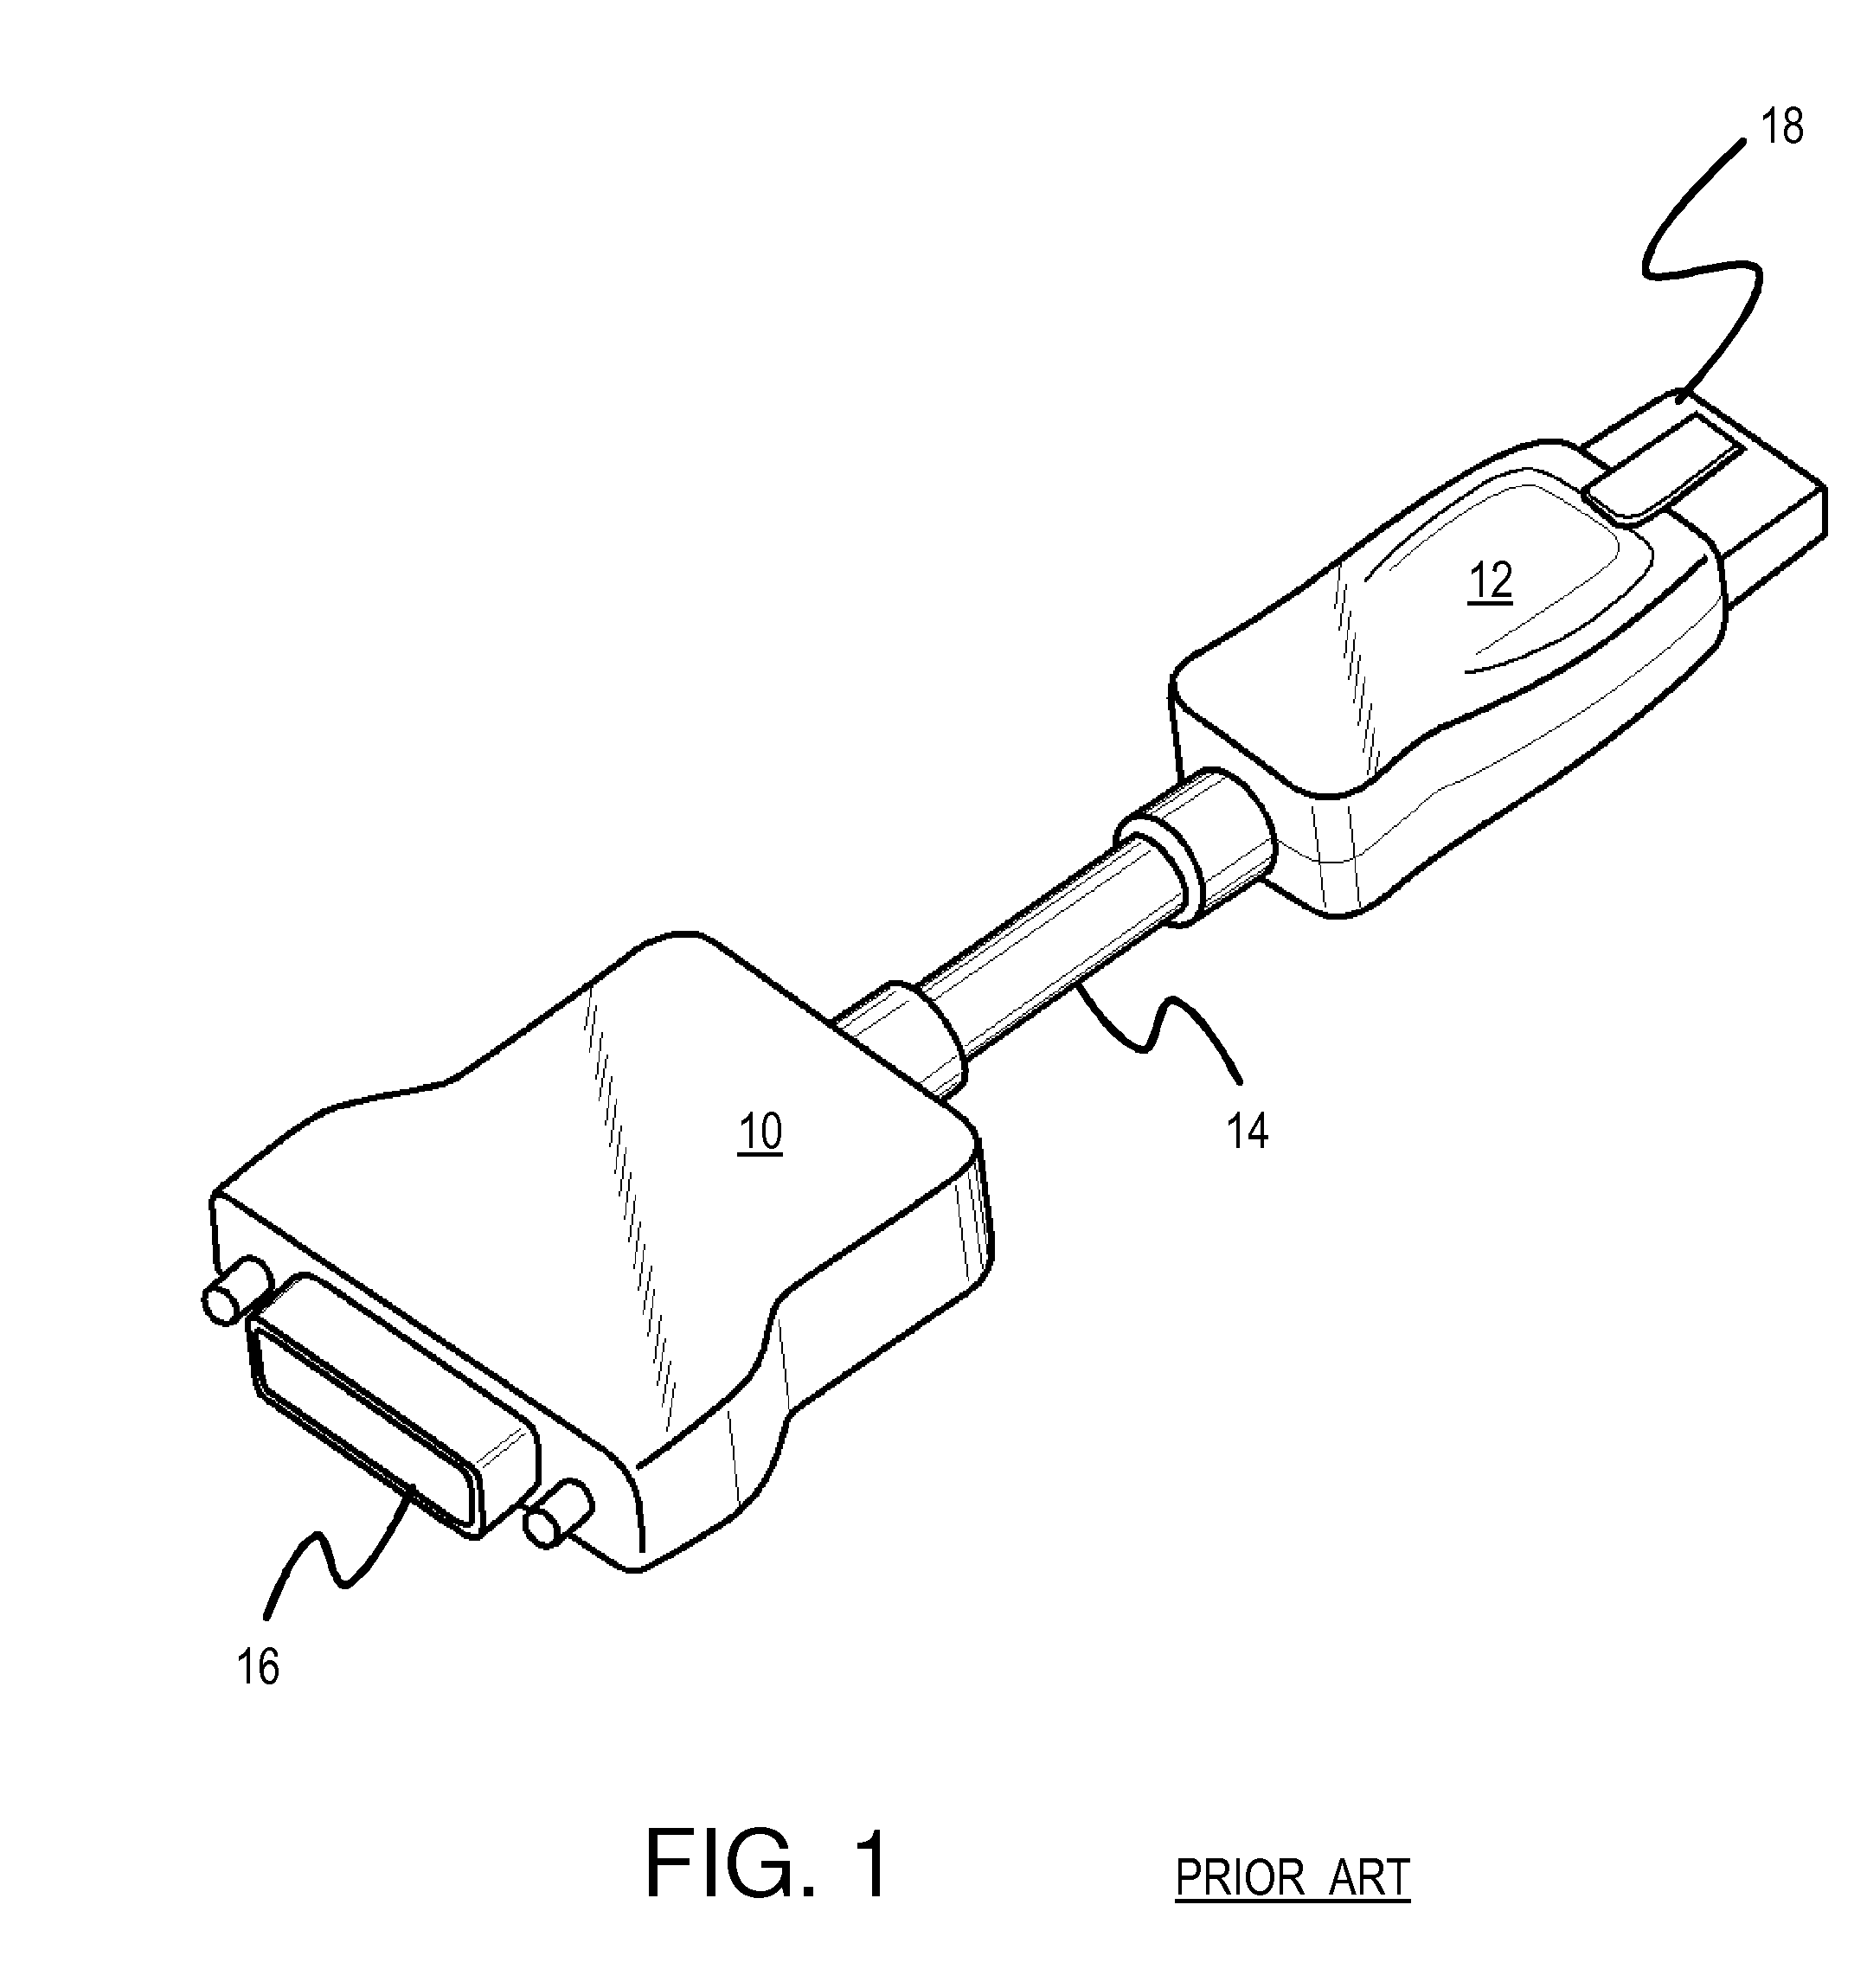 Swiveling offset adapter dongle for reducing blockage of closely-spaced video connectors